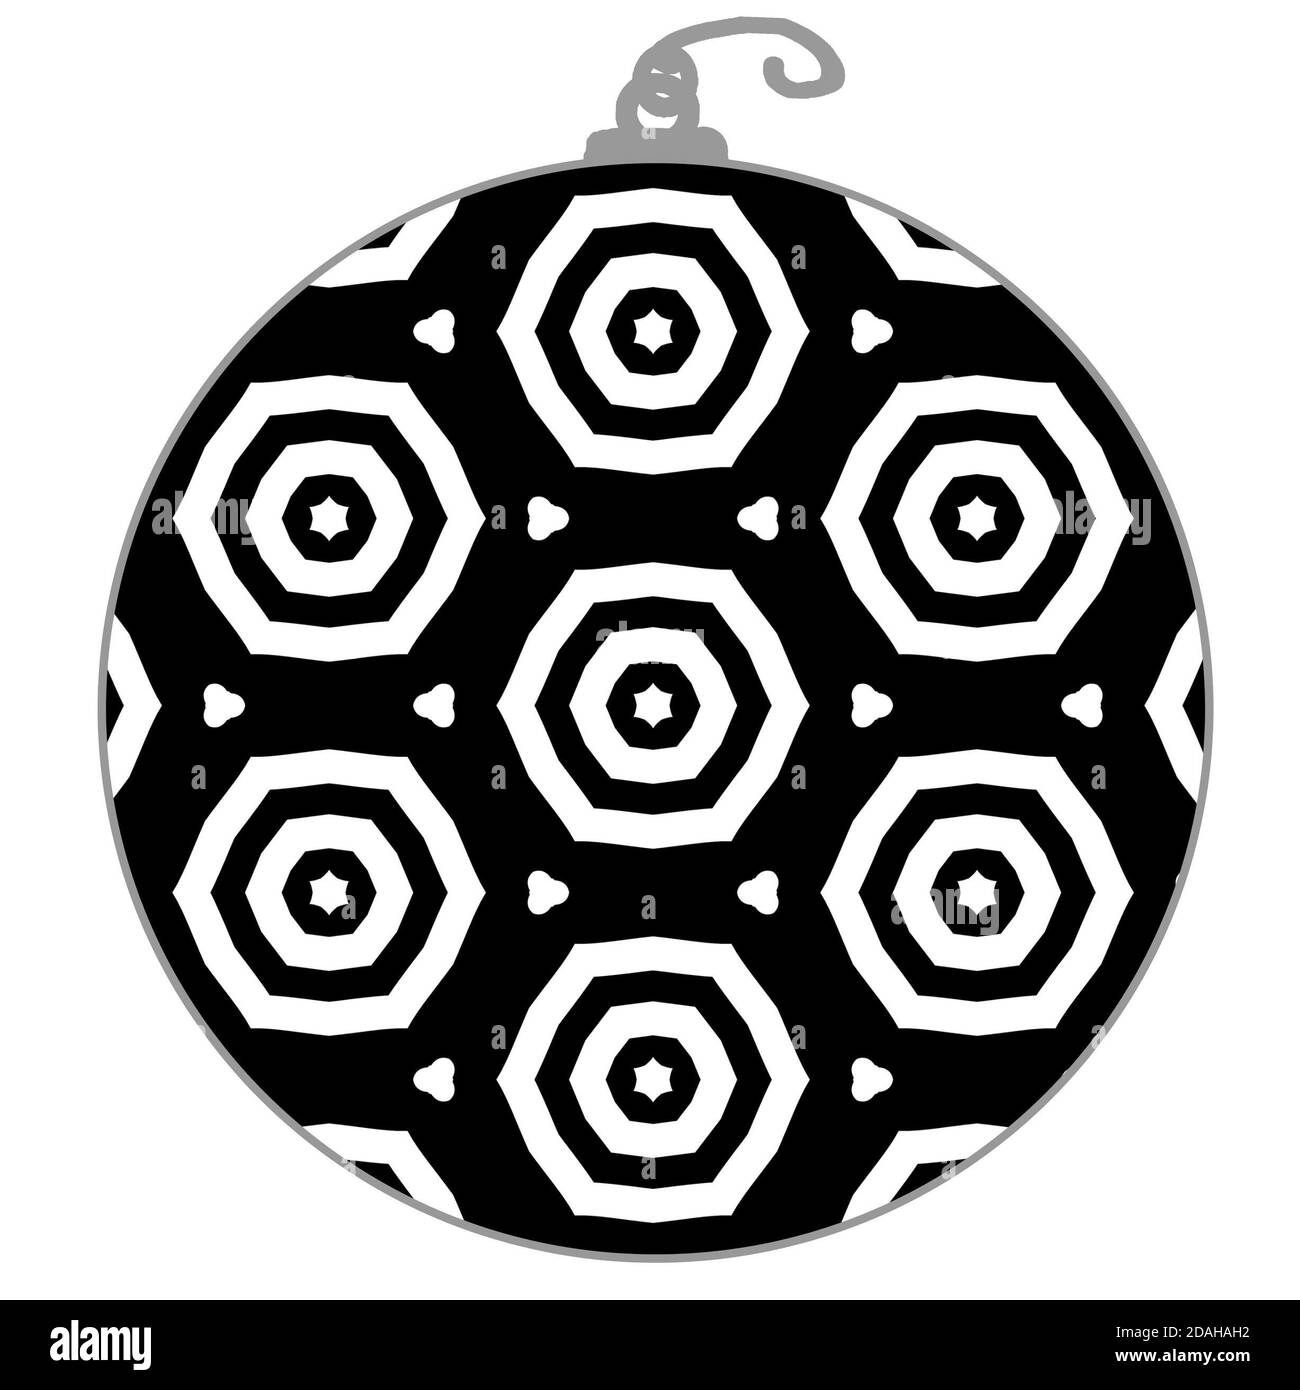 Black and white Christmas decoration with op art repeating pattern Stock Photo